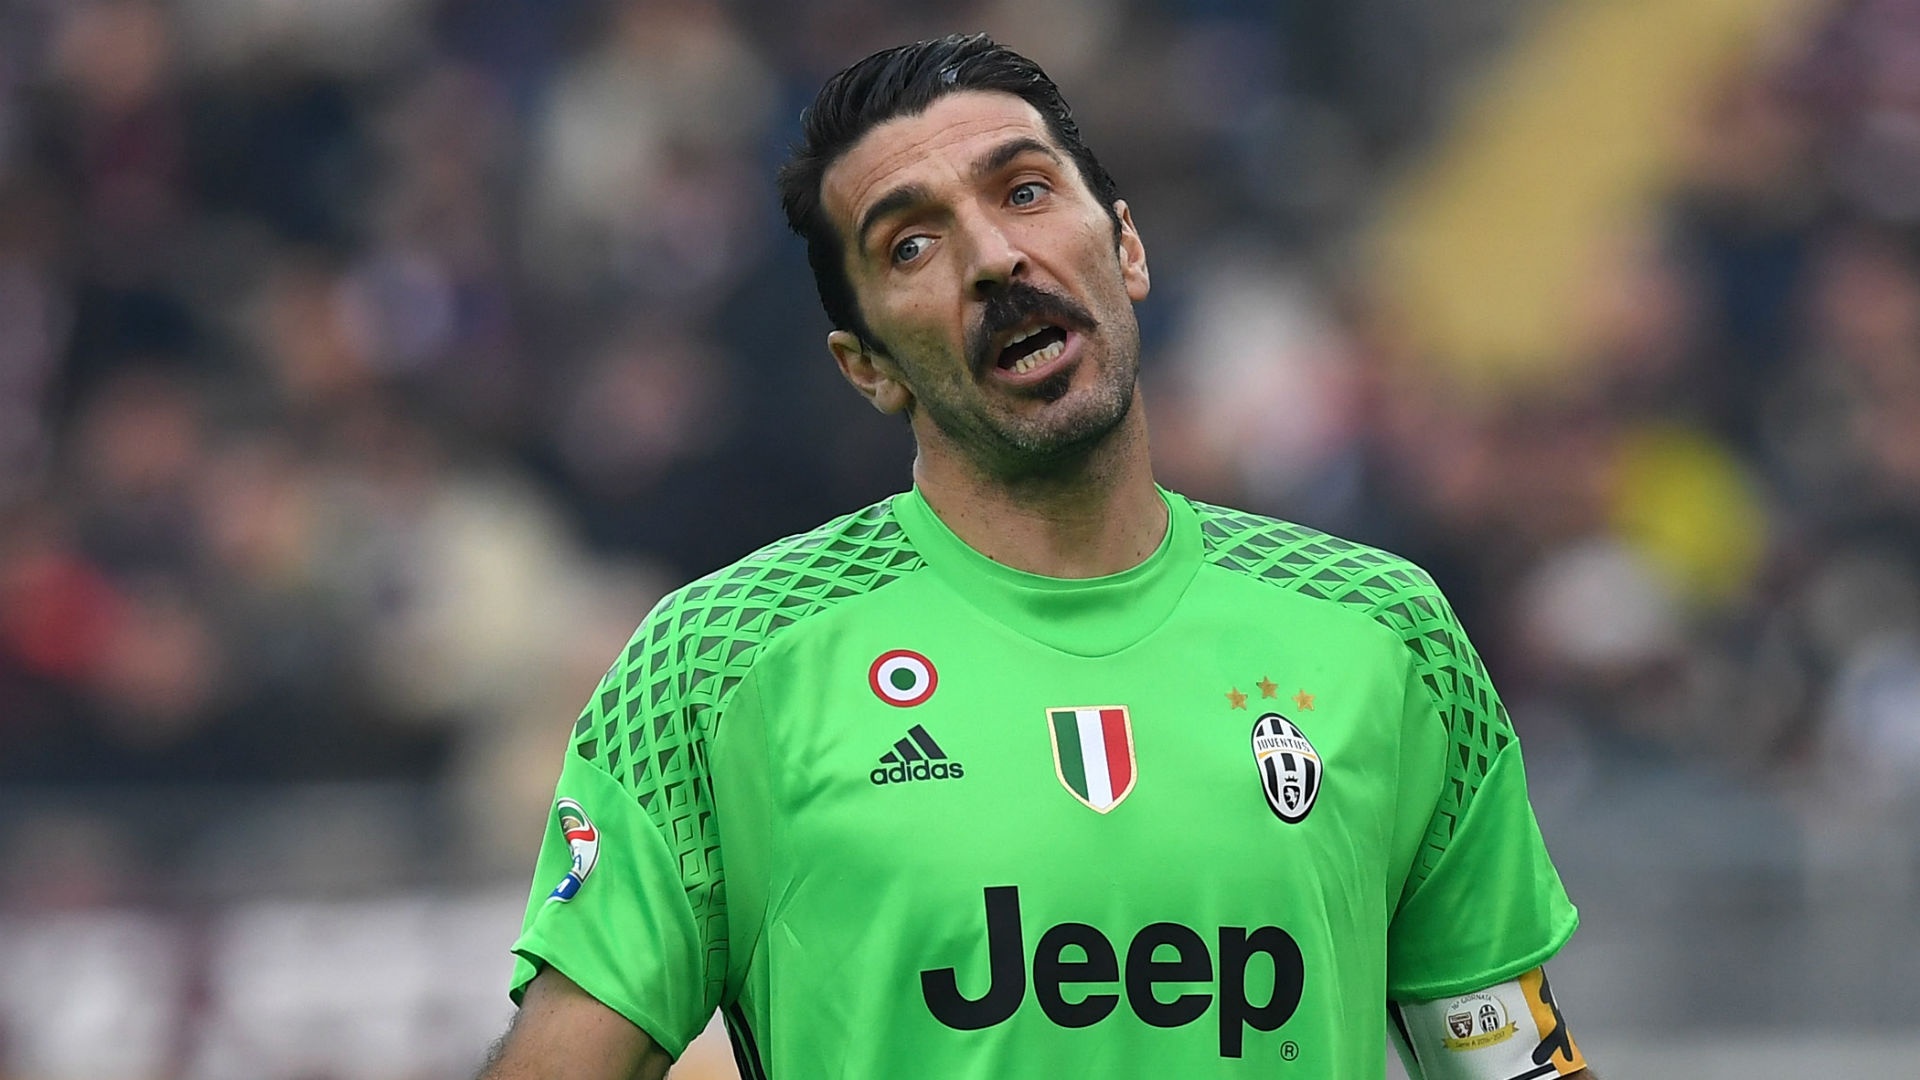 Gianluigi Buffon is set to make his 600th appearance for Juve. Goal